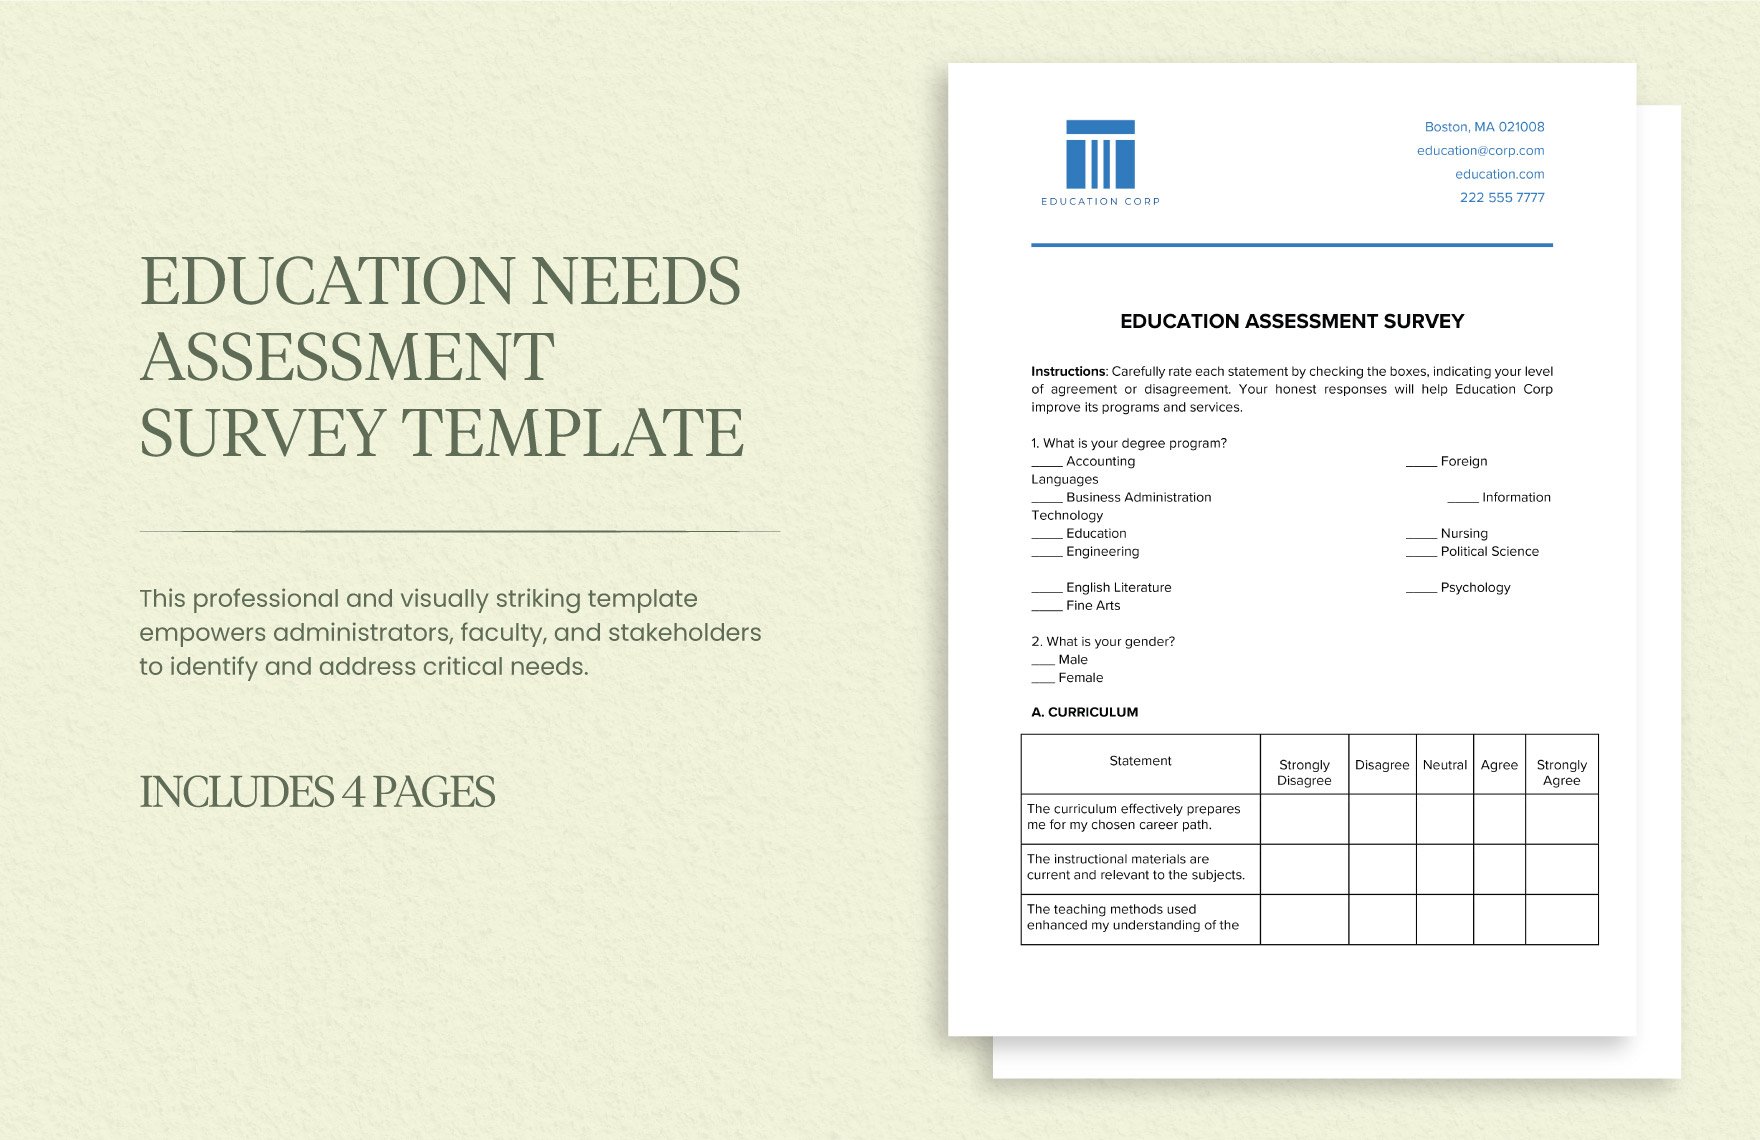 Education Needs Assessment Survey Template in Word, Google Docs, PDF